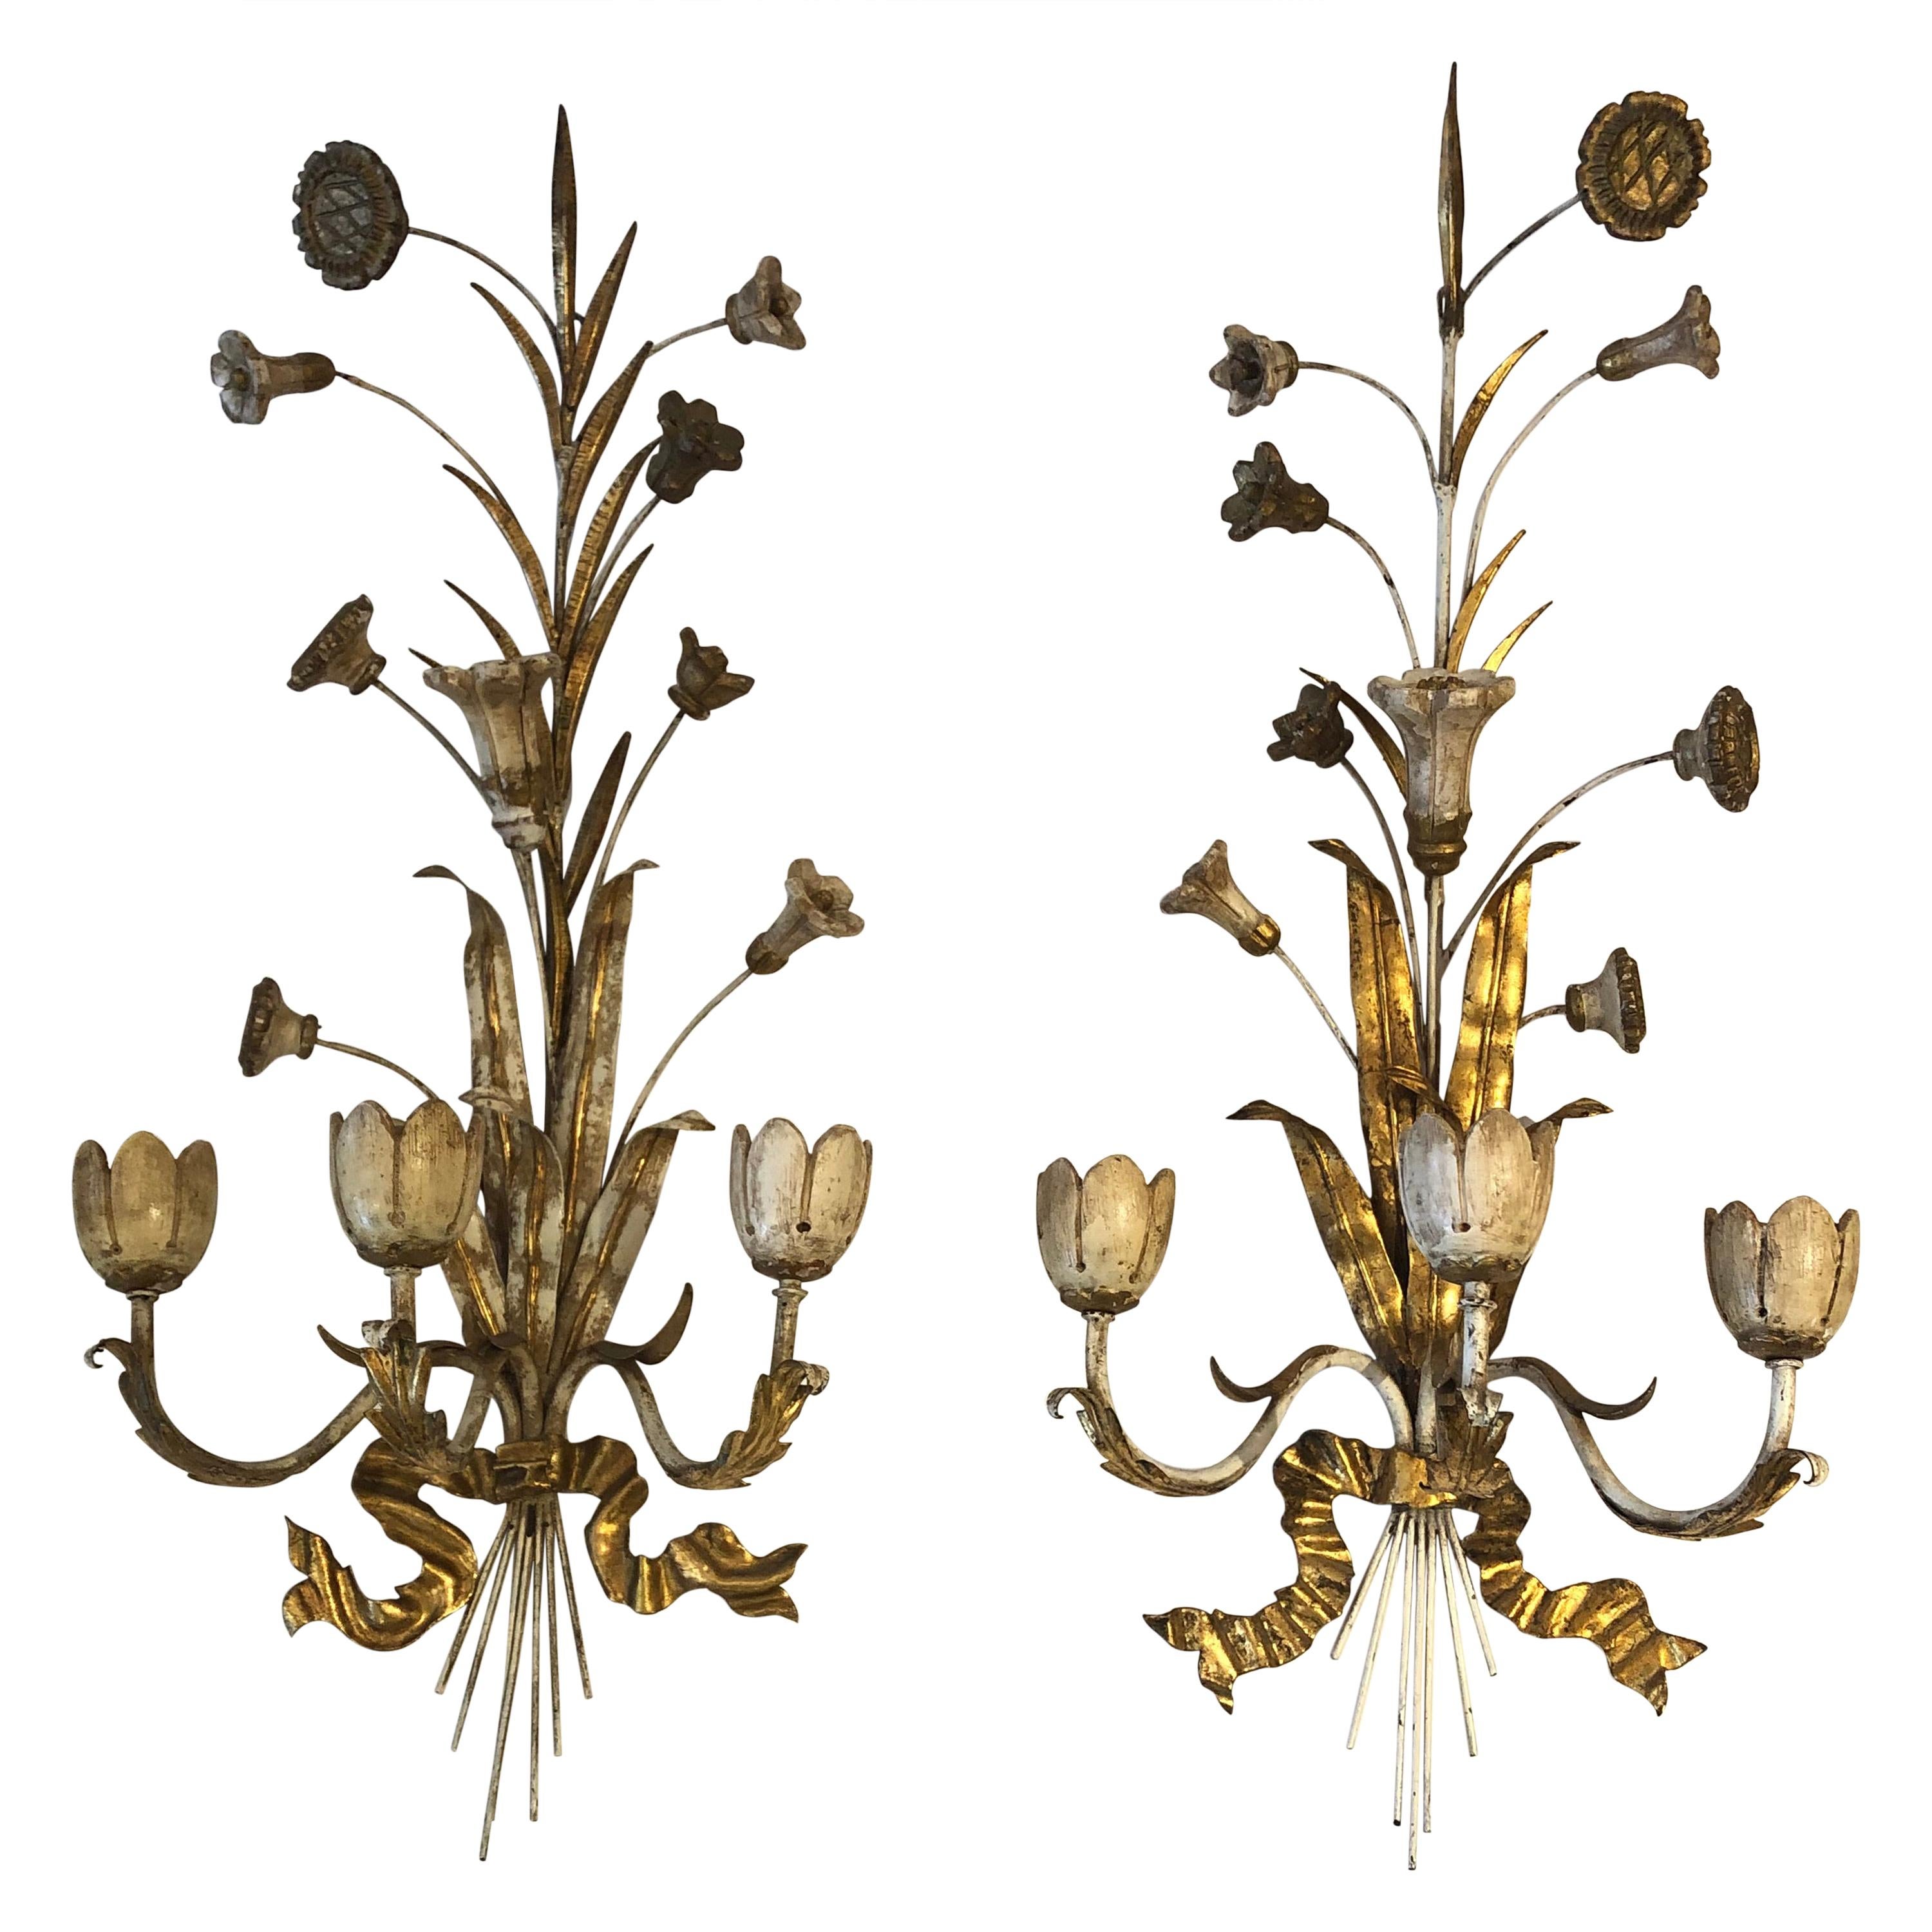 Exquisite Pair of Gold Gilt Iron Carved Wood French Tulip Motife Candle Sconces